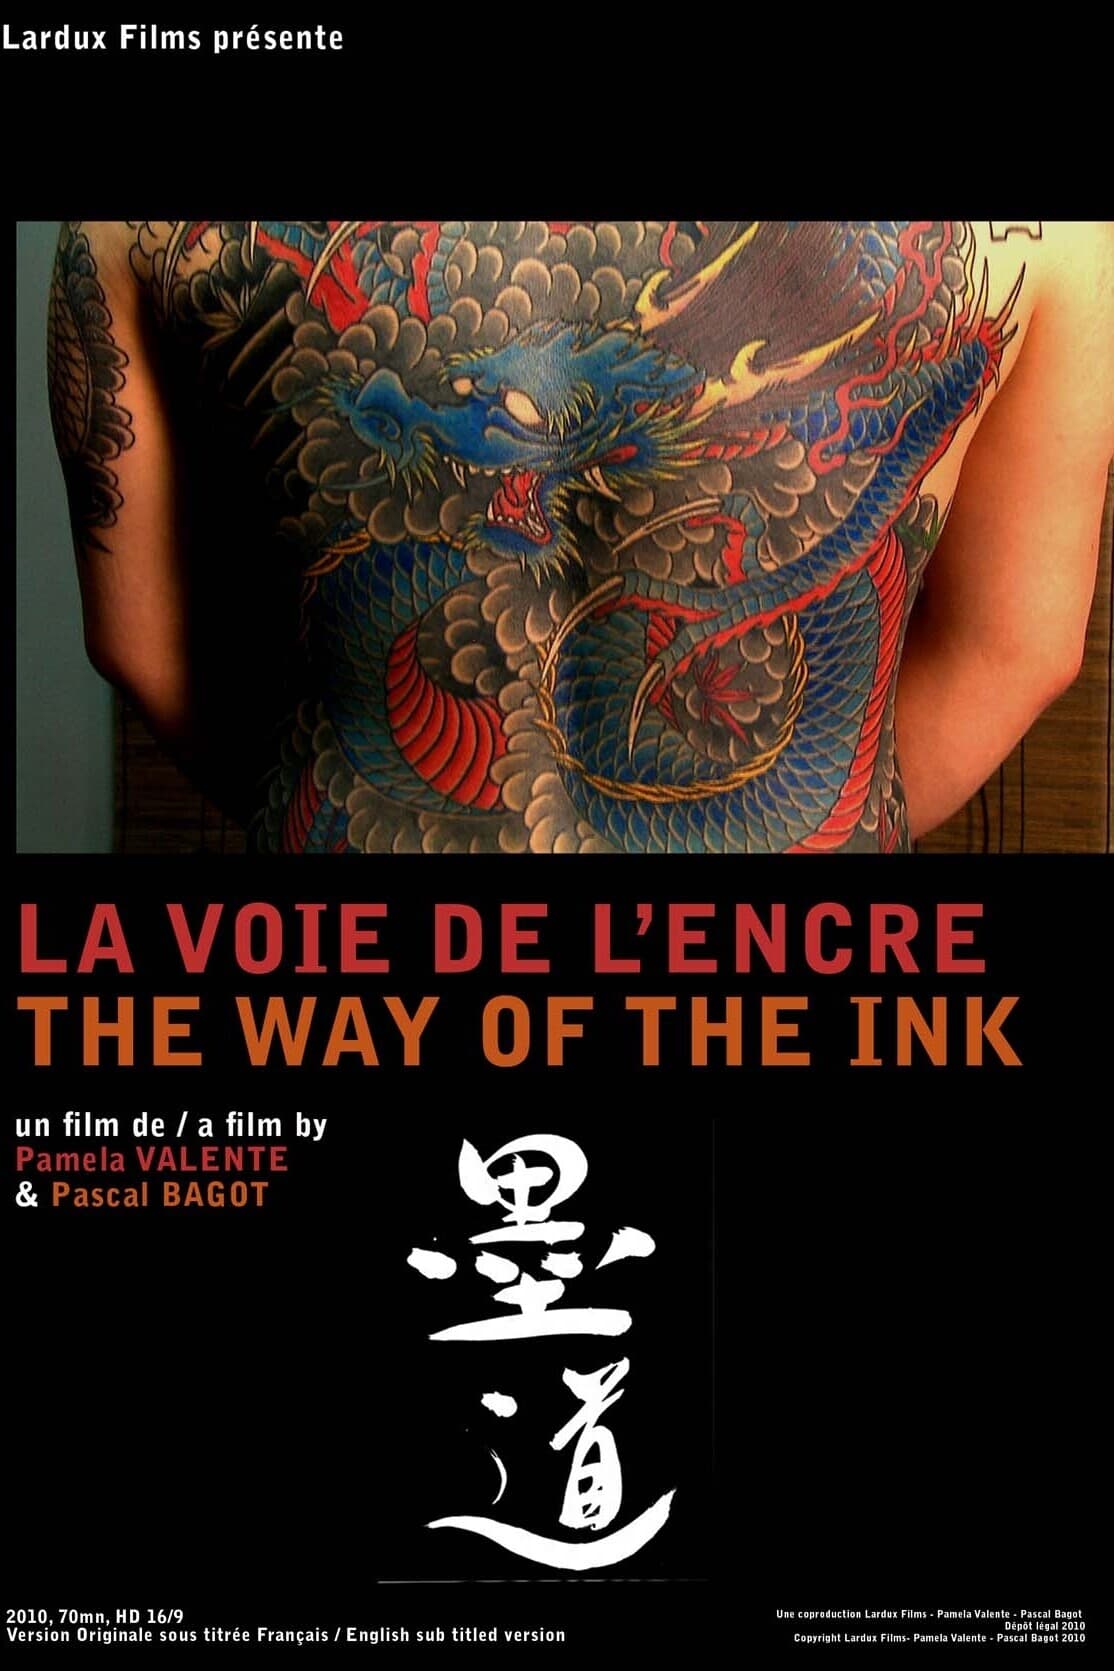 The Way of the Ink